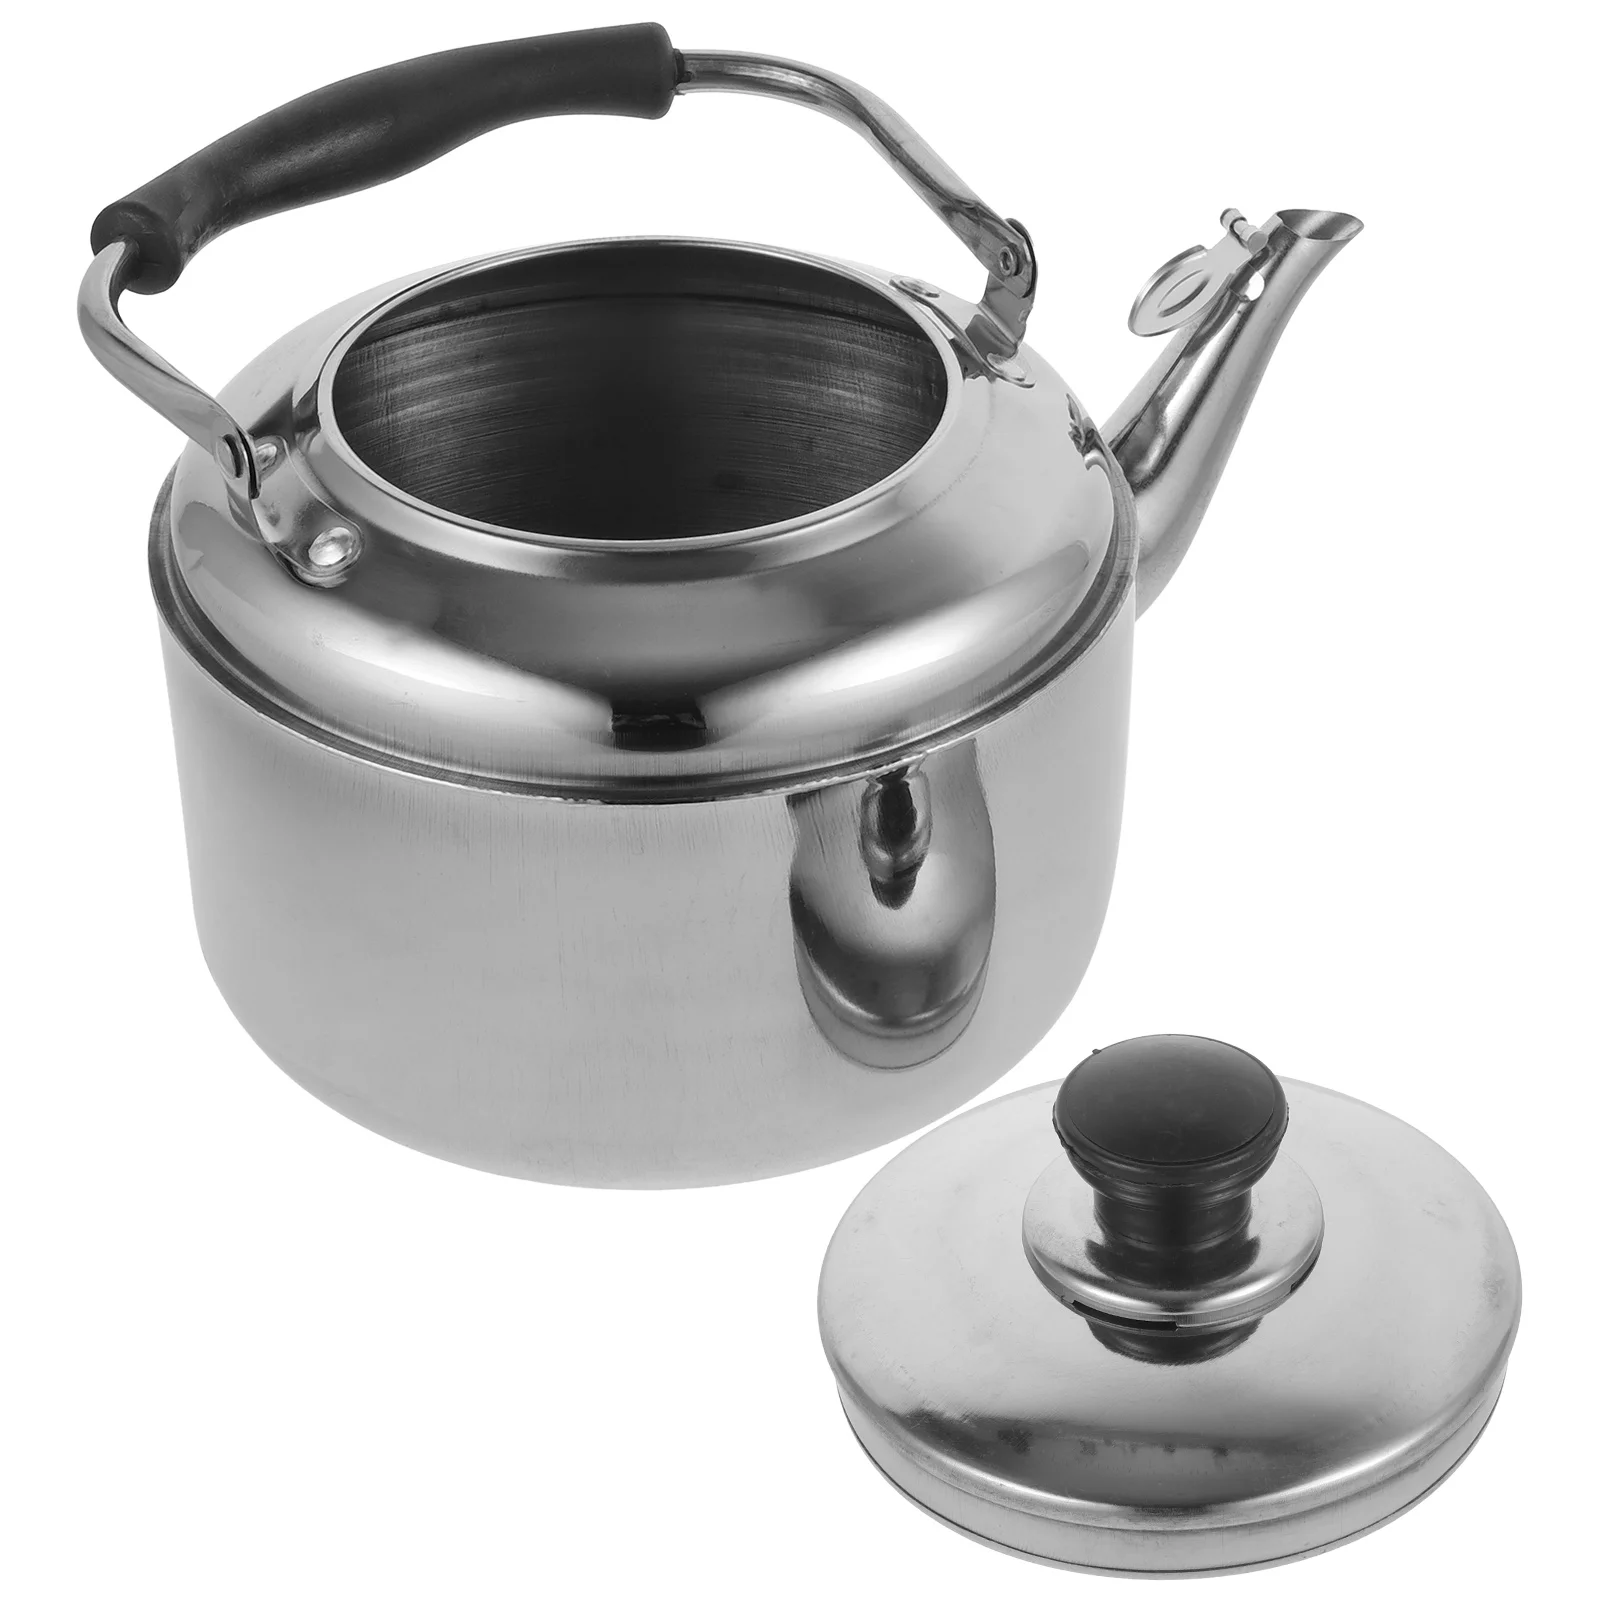 

Whistling Tea Kettle Stainless Steel Sound Teapot Gas Stovetop Hot Water Boiling Tea Pots for Gas Induction Electric Kettles